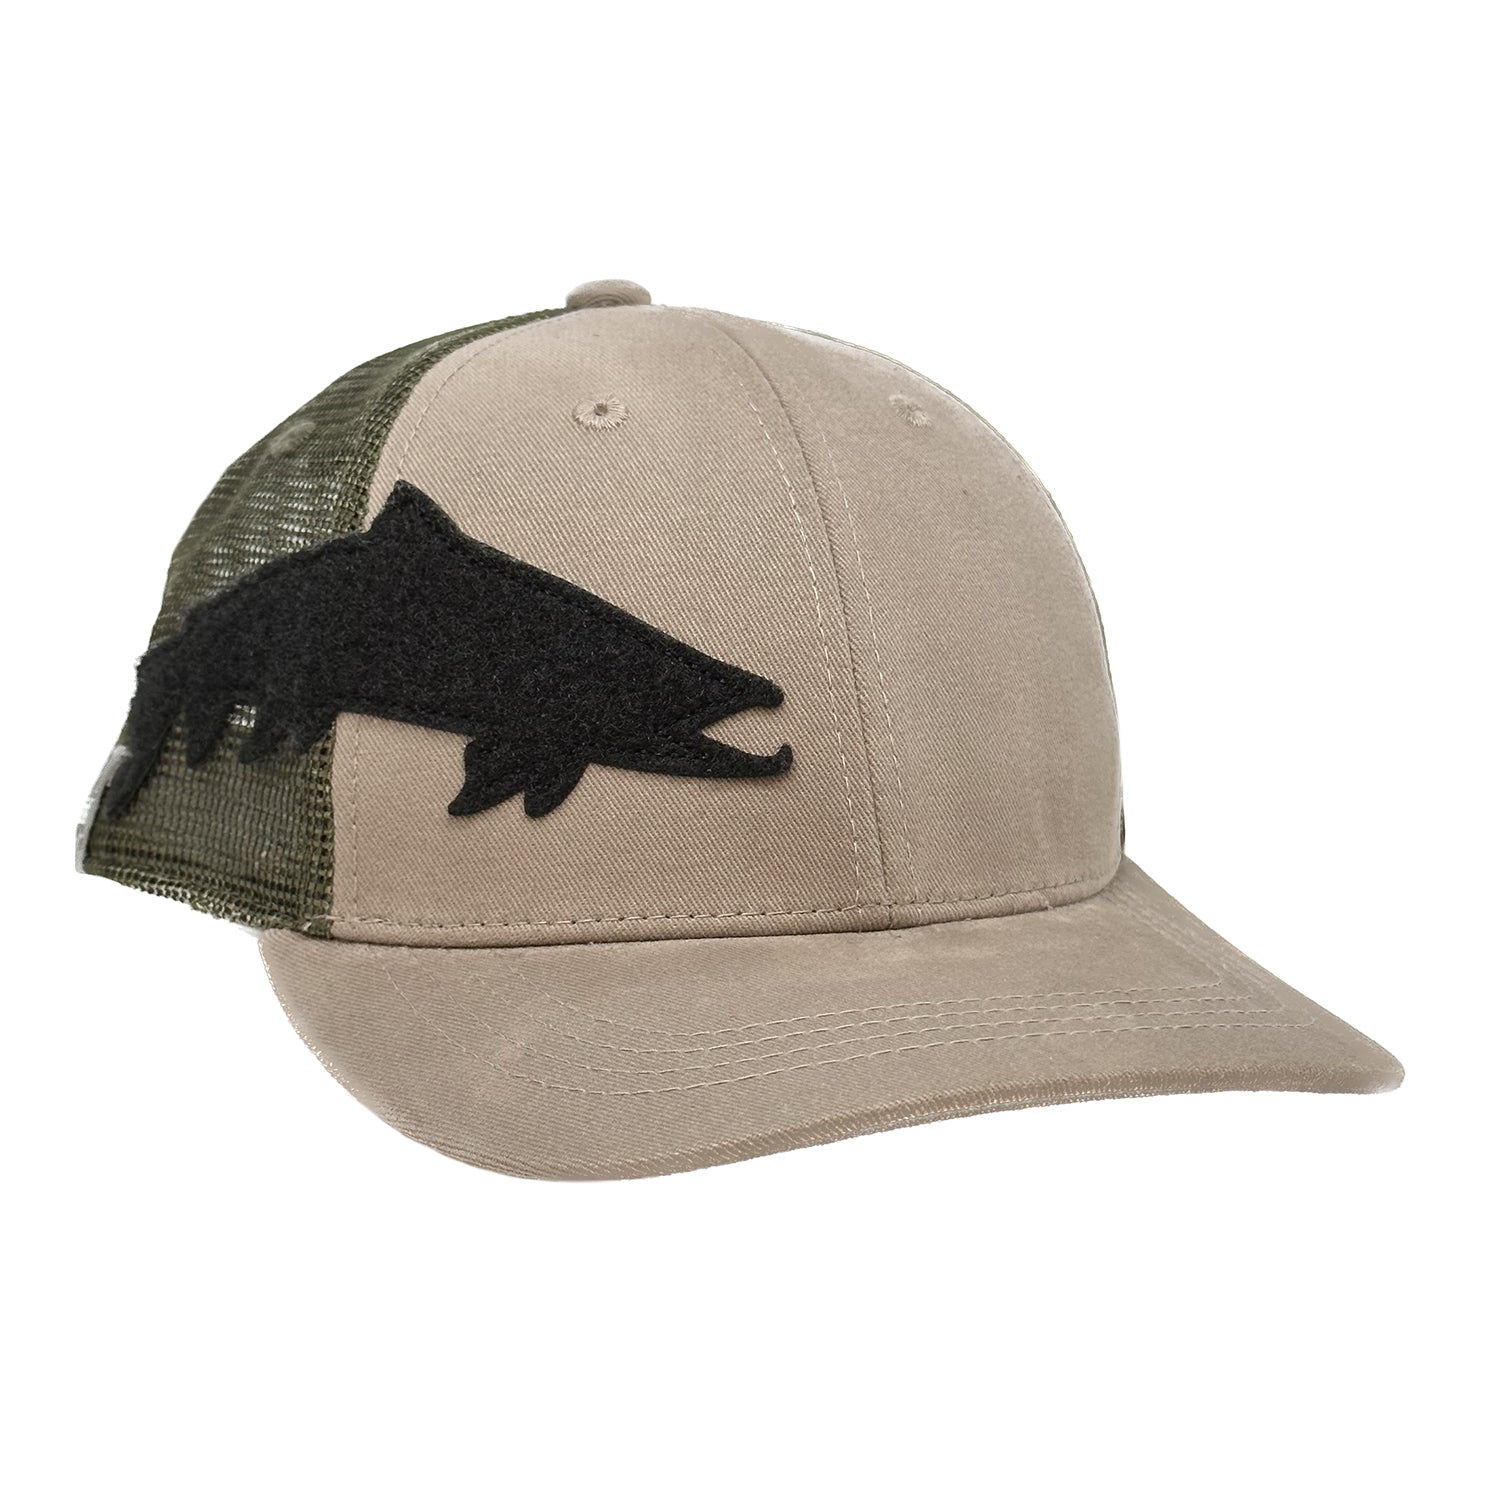 A stone front with forest green mesh back hat with a black velcro fish on the side for placing flies and things